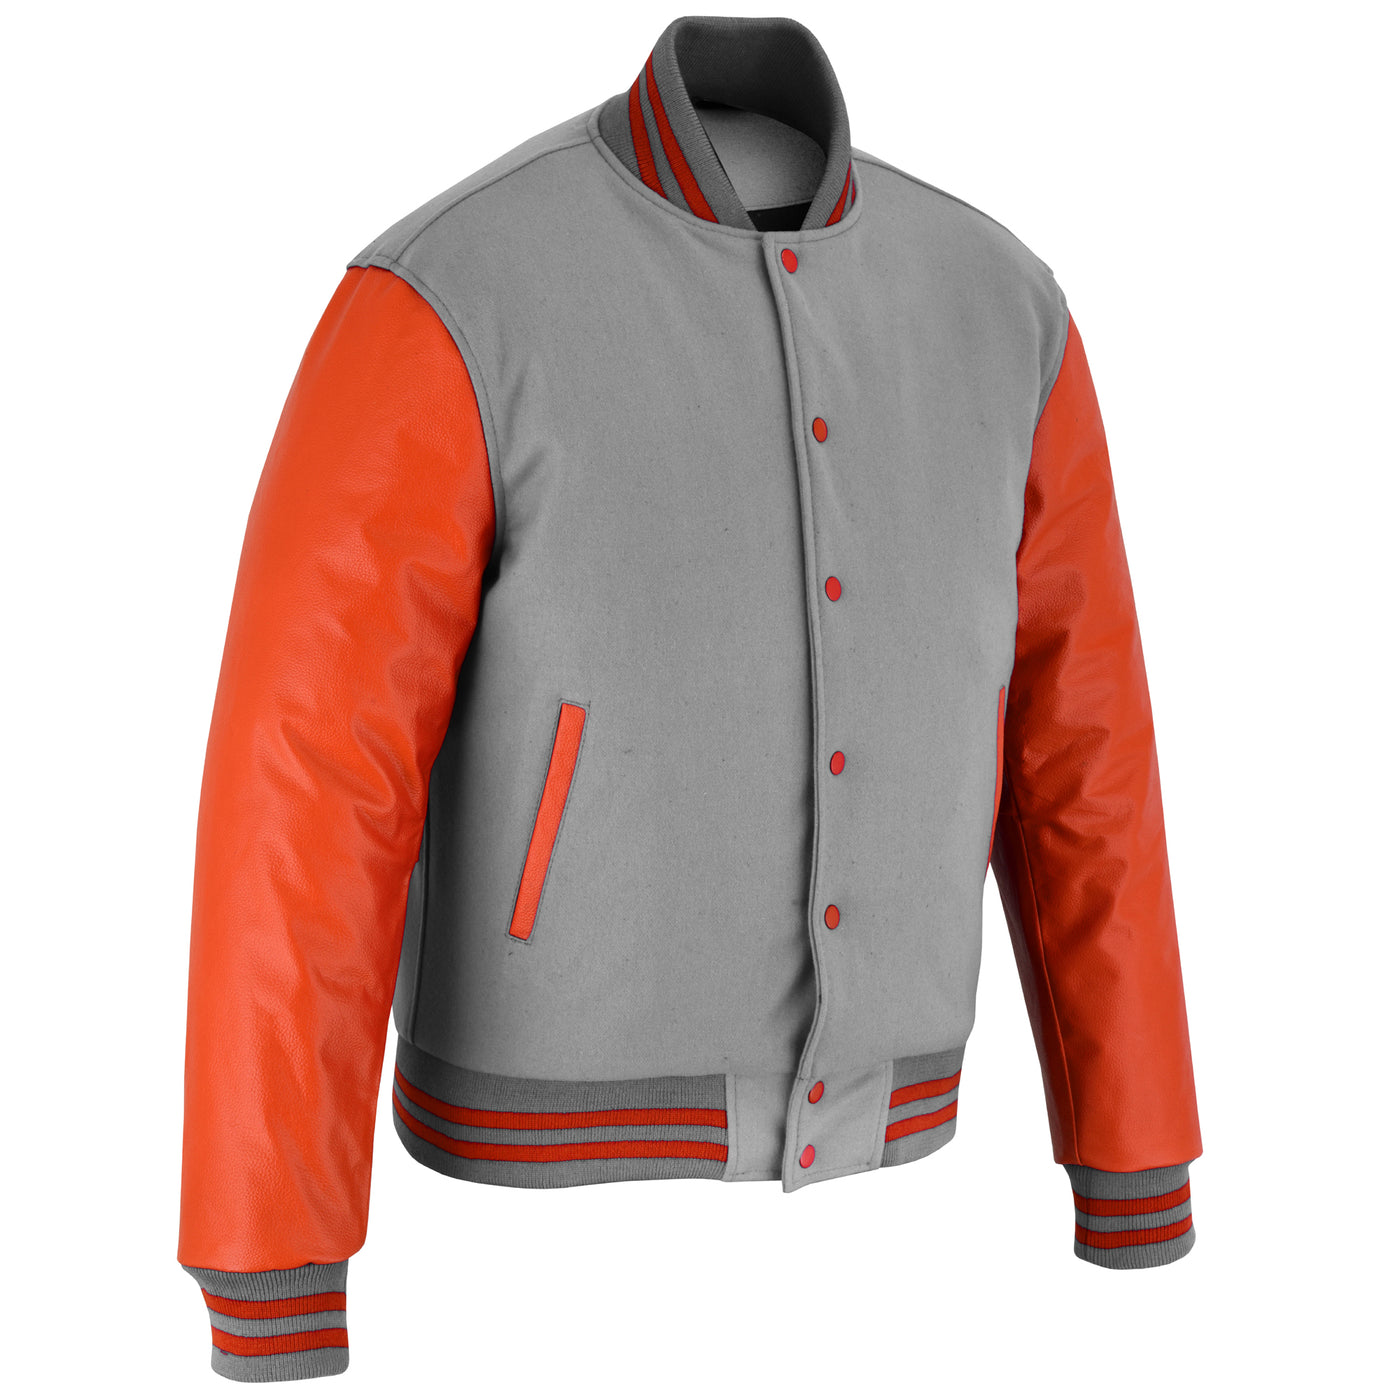 Classic Varsity Letterman Jacket Light Grey Wool with Orange Genuine Leather Sleeves and trims